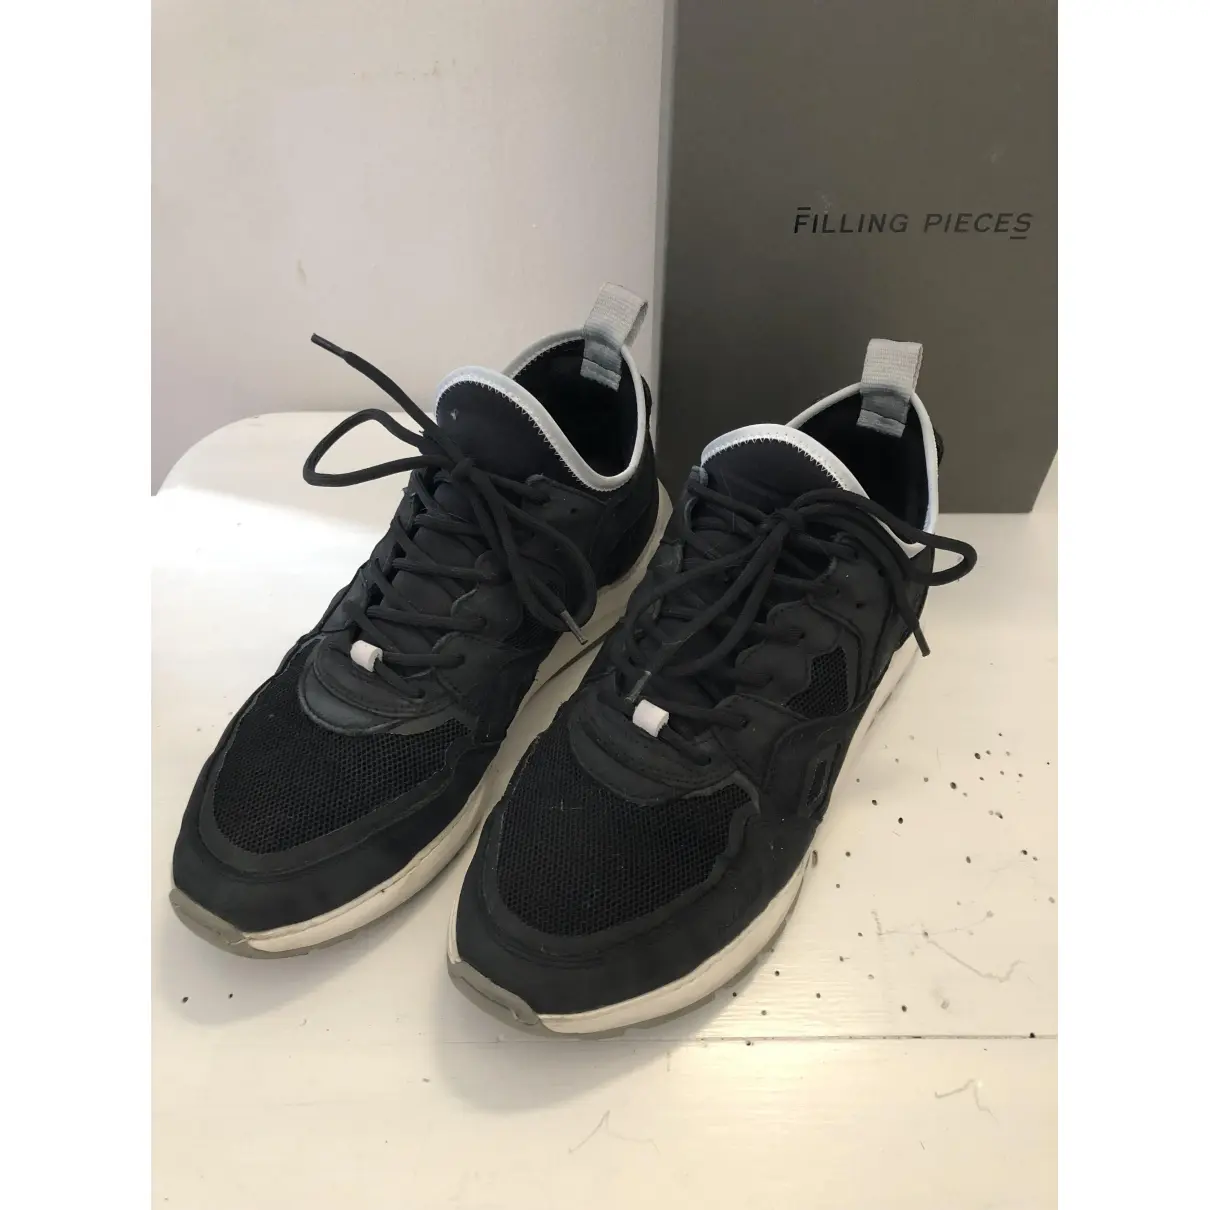 Filling Pieces Leather trainers for sale